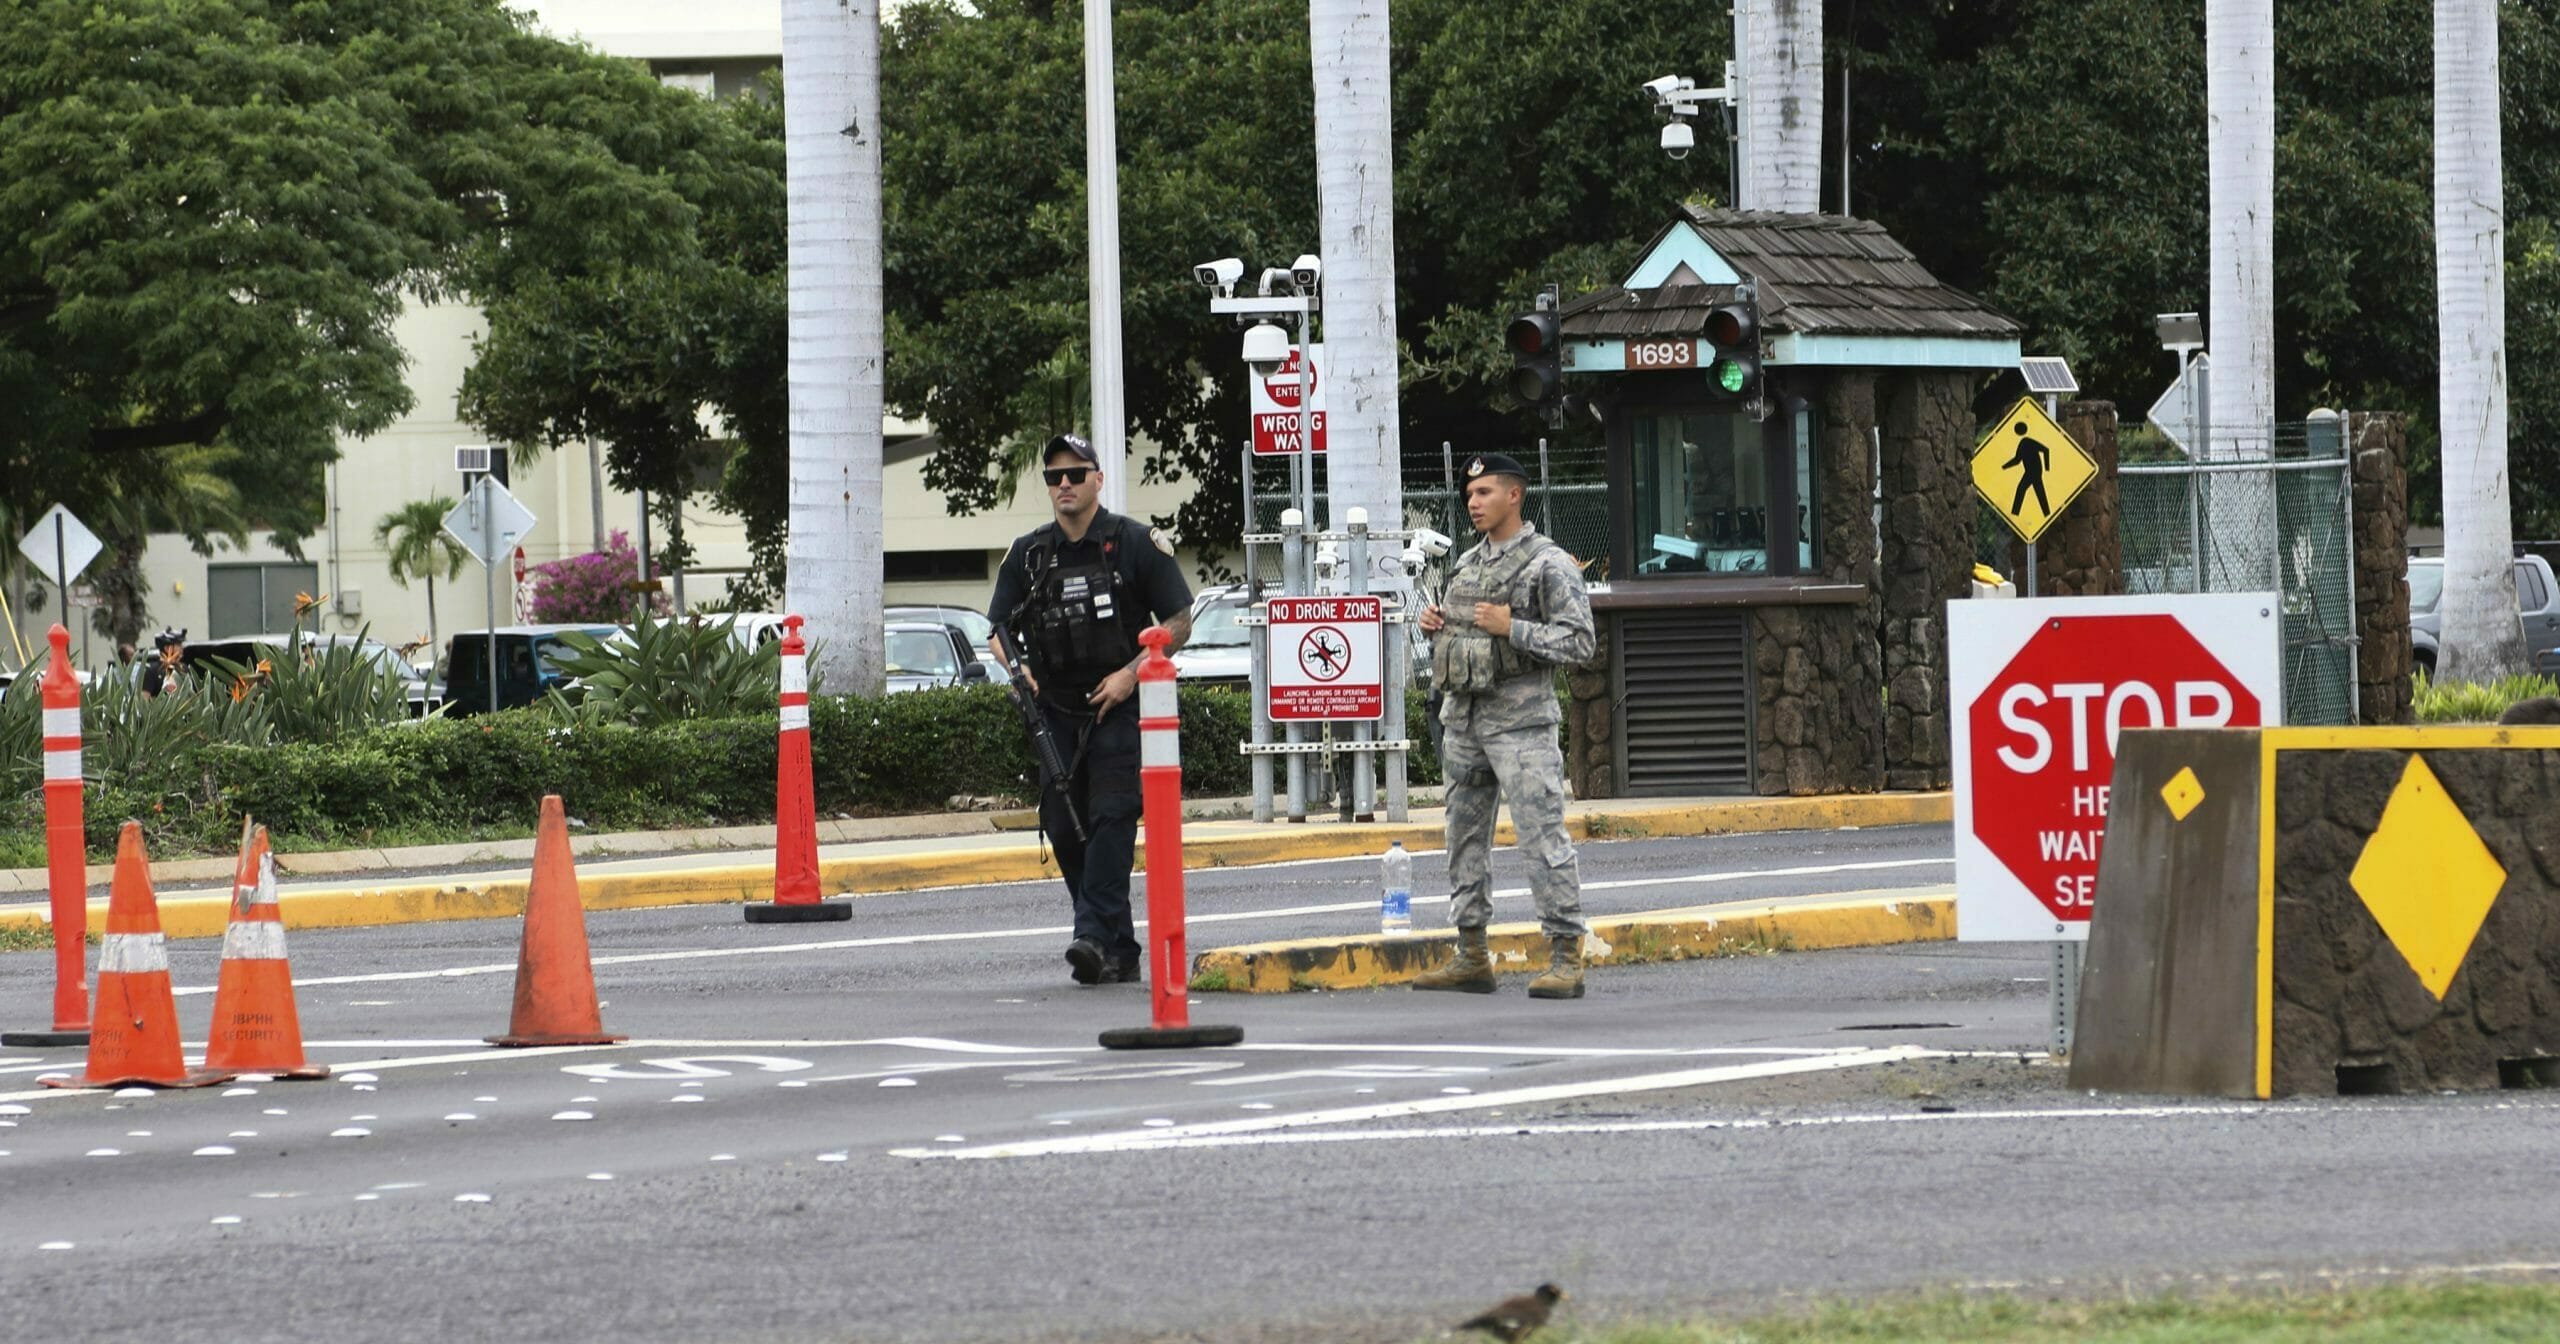 In this Dec. 4, 2019, file photo, security guards stand outside the main gate at Joint Base Pearl Harbor-Hickam in Hawaii. A live mortar round was found in a vehicle late Tuesday at a gate to the sprawling Pearl Harbor military base, shutting down the base for hours and leading three people to be taken into custody, military officials said Wednesday.